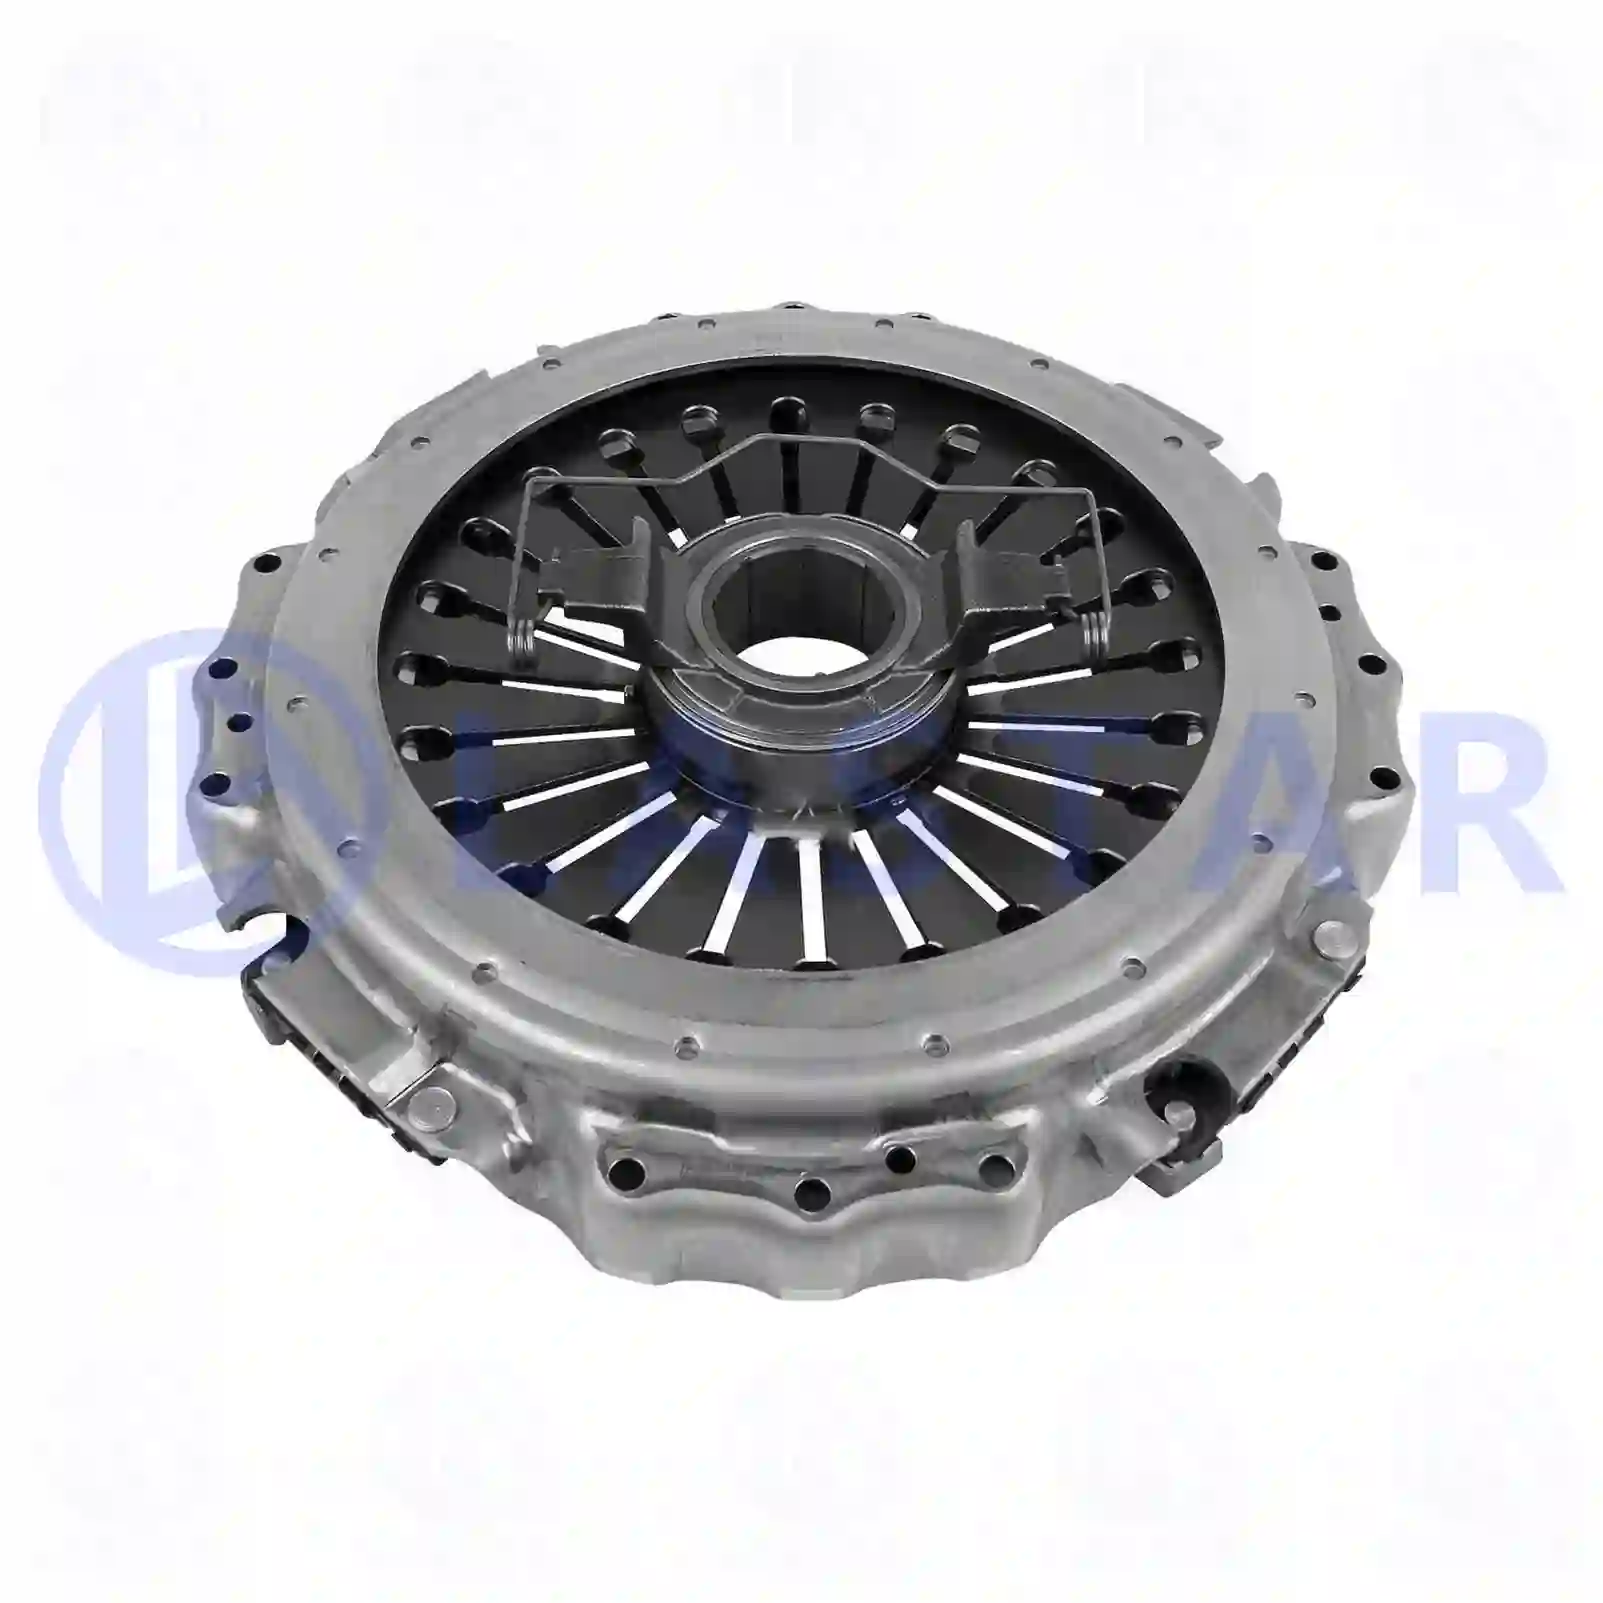 Clutch cover, with release bearing, 77722302, 20366765, 20569147, 85000235, 85000530 ||  77722302 Lastar Spare Part | Truck Spare Parts, Auotomotive Spare Parts Clutch cover, with release bearing, 77722302, 20366765, 20569147, 85000235, 85000530 ||  77722302 Lastar Spare Part | Truck Spare Parts, Auotomotive Spare Parts